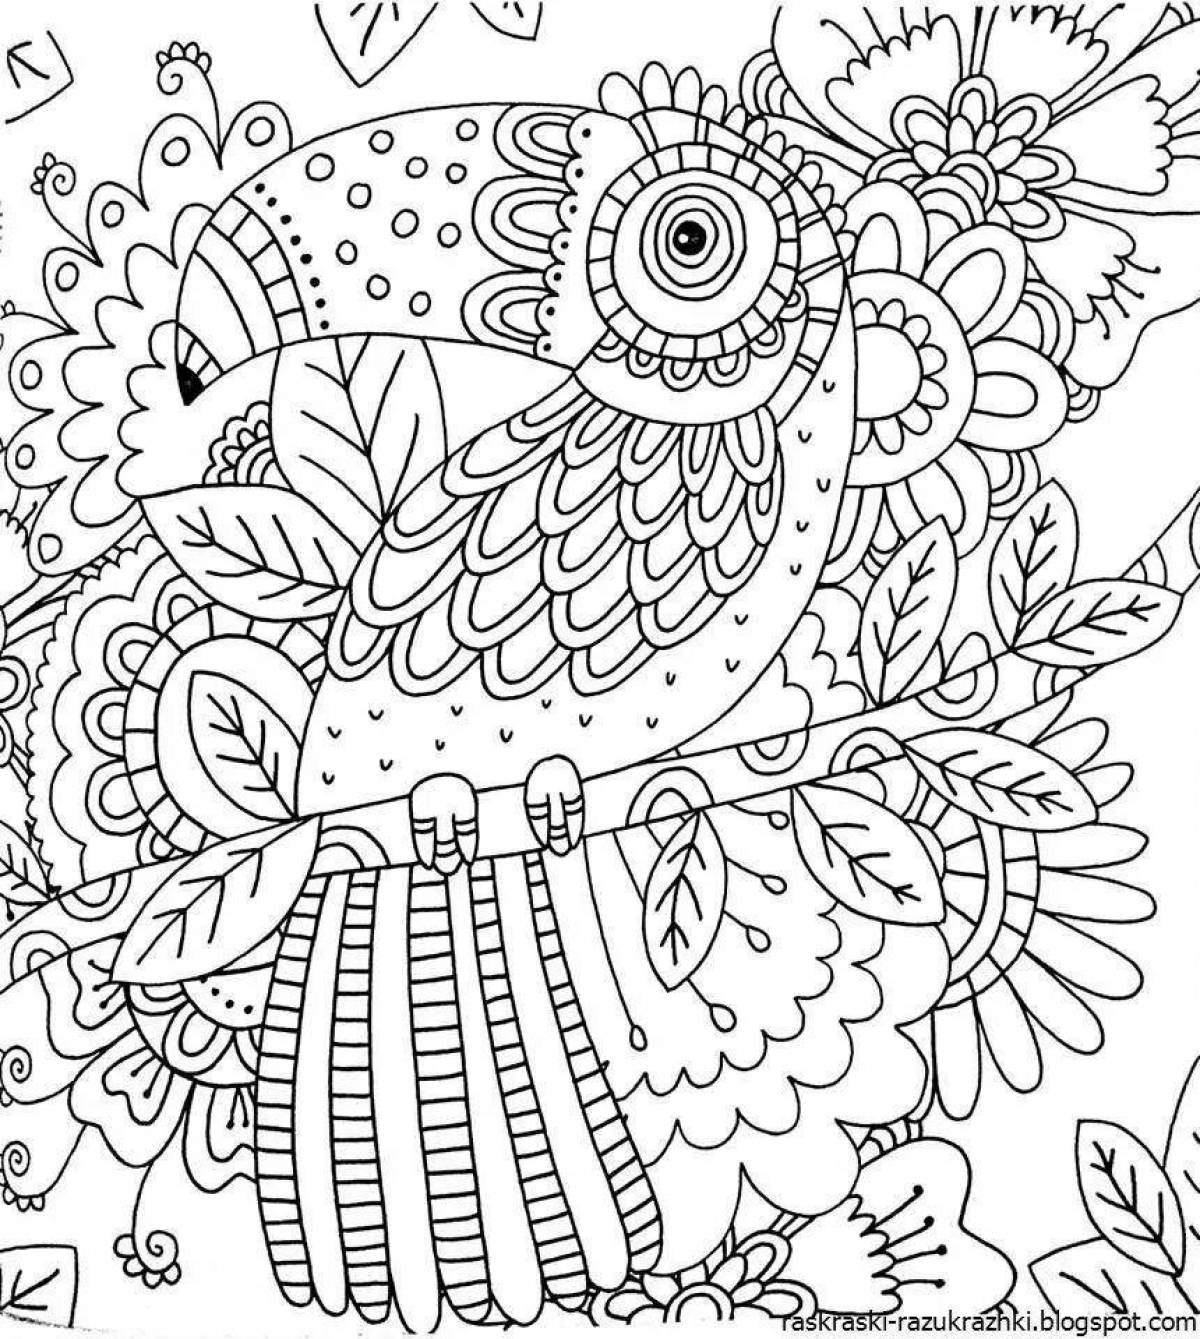 Gorgeous coloring book difficult for girls 7 years old